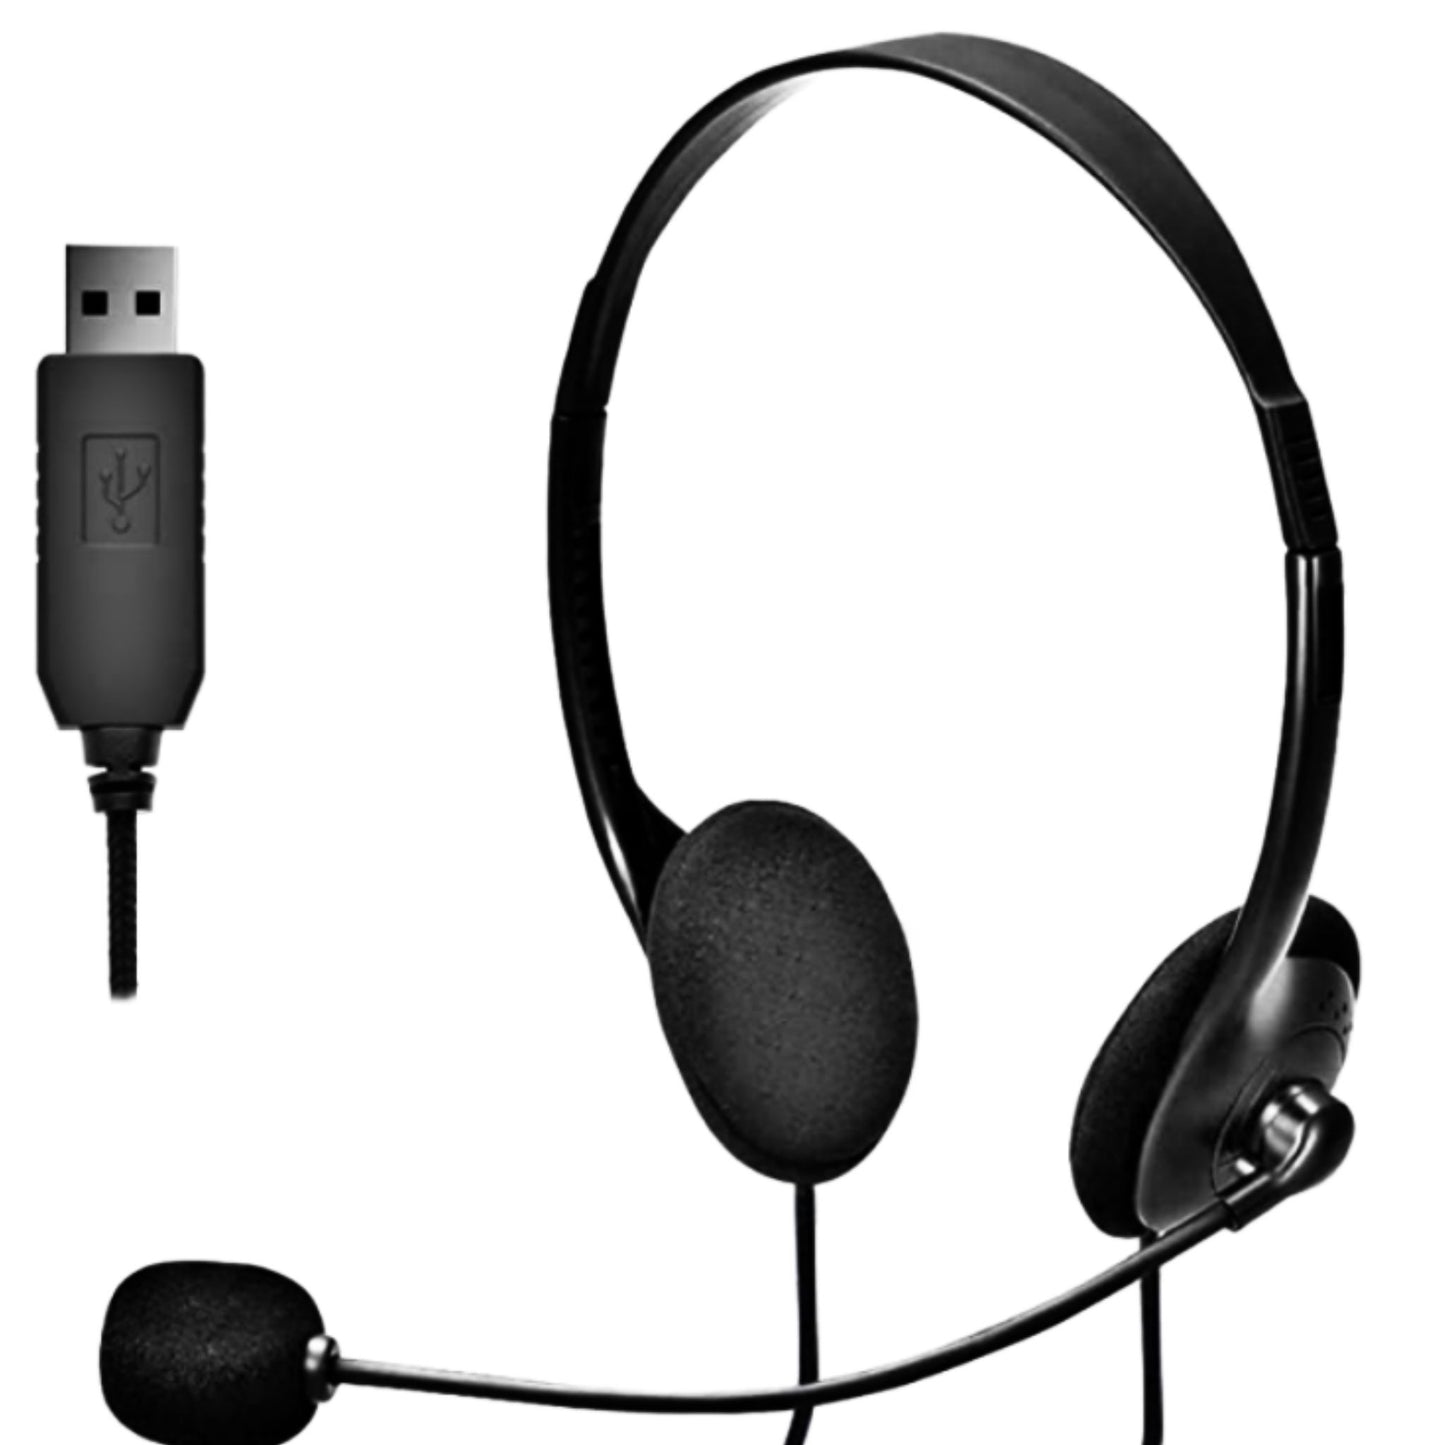 USB headset with mic